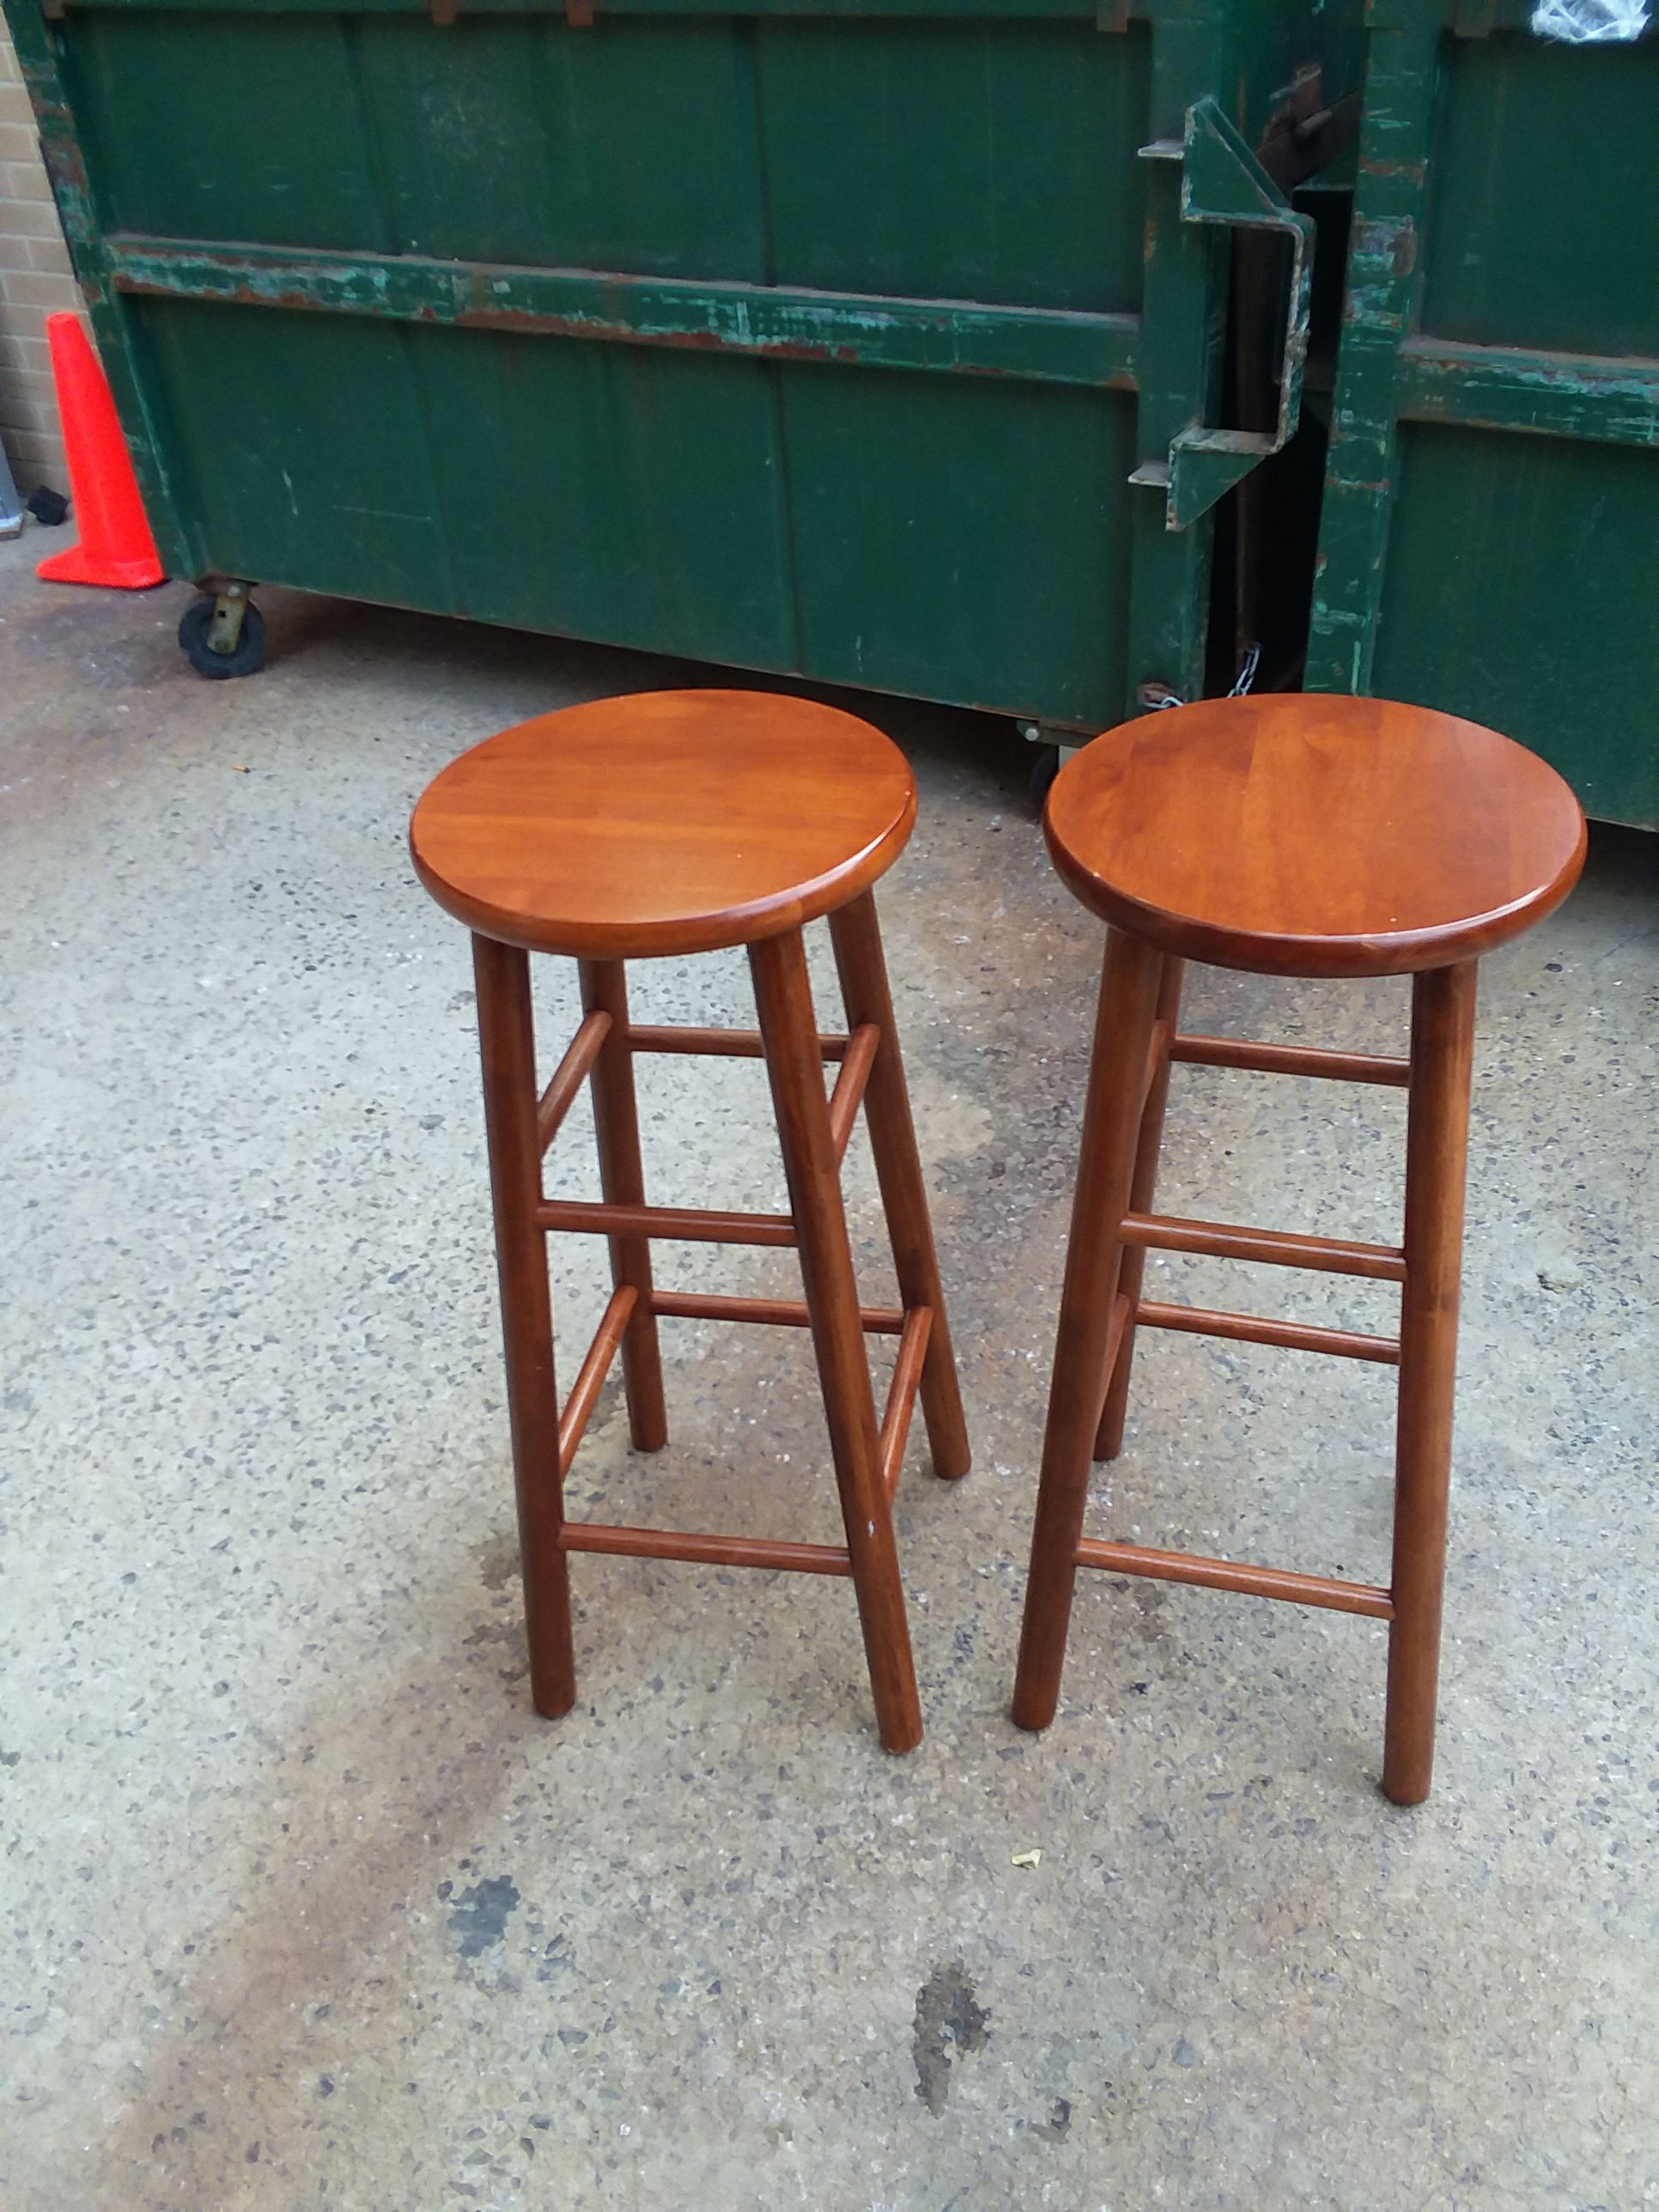 Two brown stools